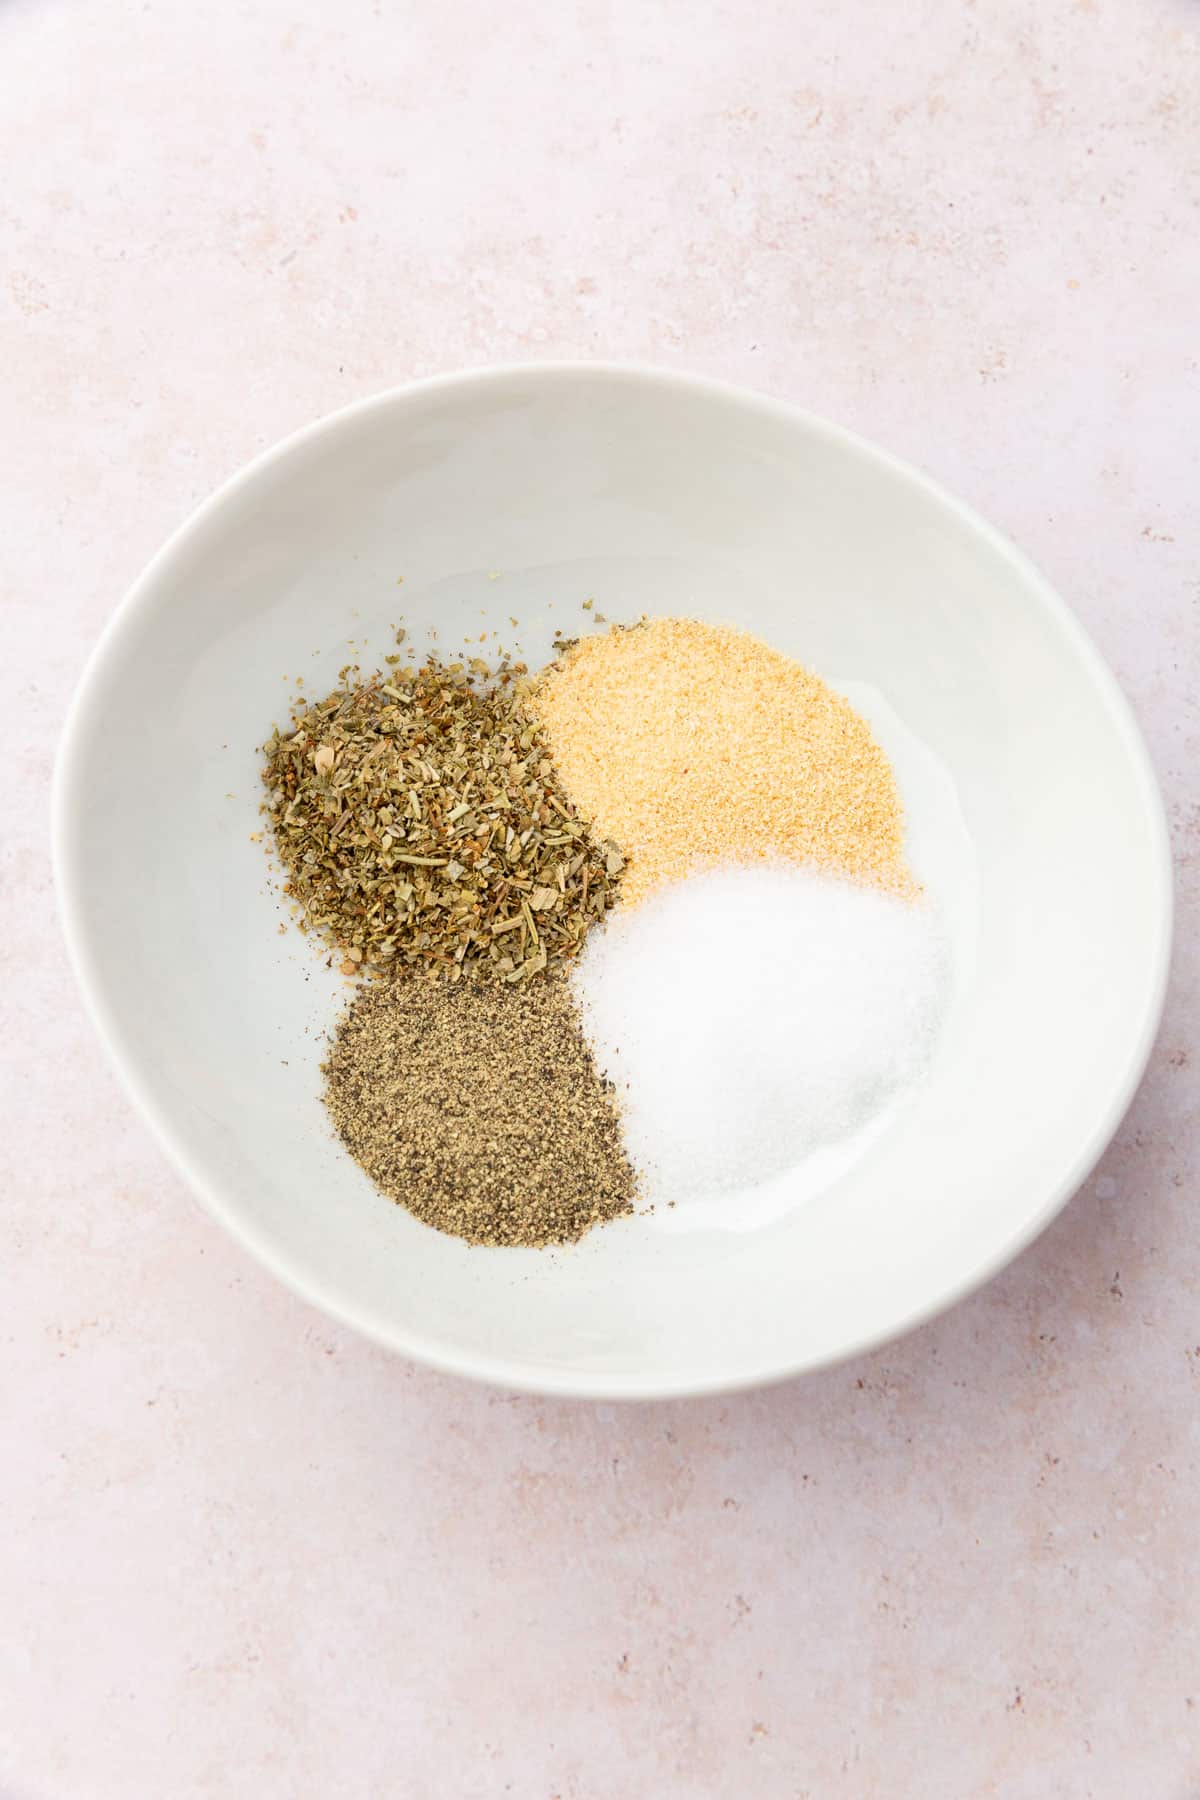 A small white bowl of Italian seasoning blend, garlic powder, salt, and black pepper that have not been mixed together.